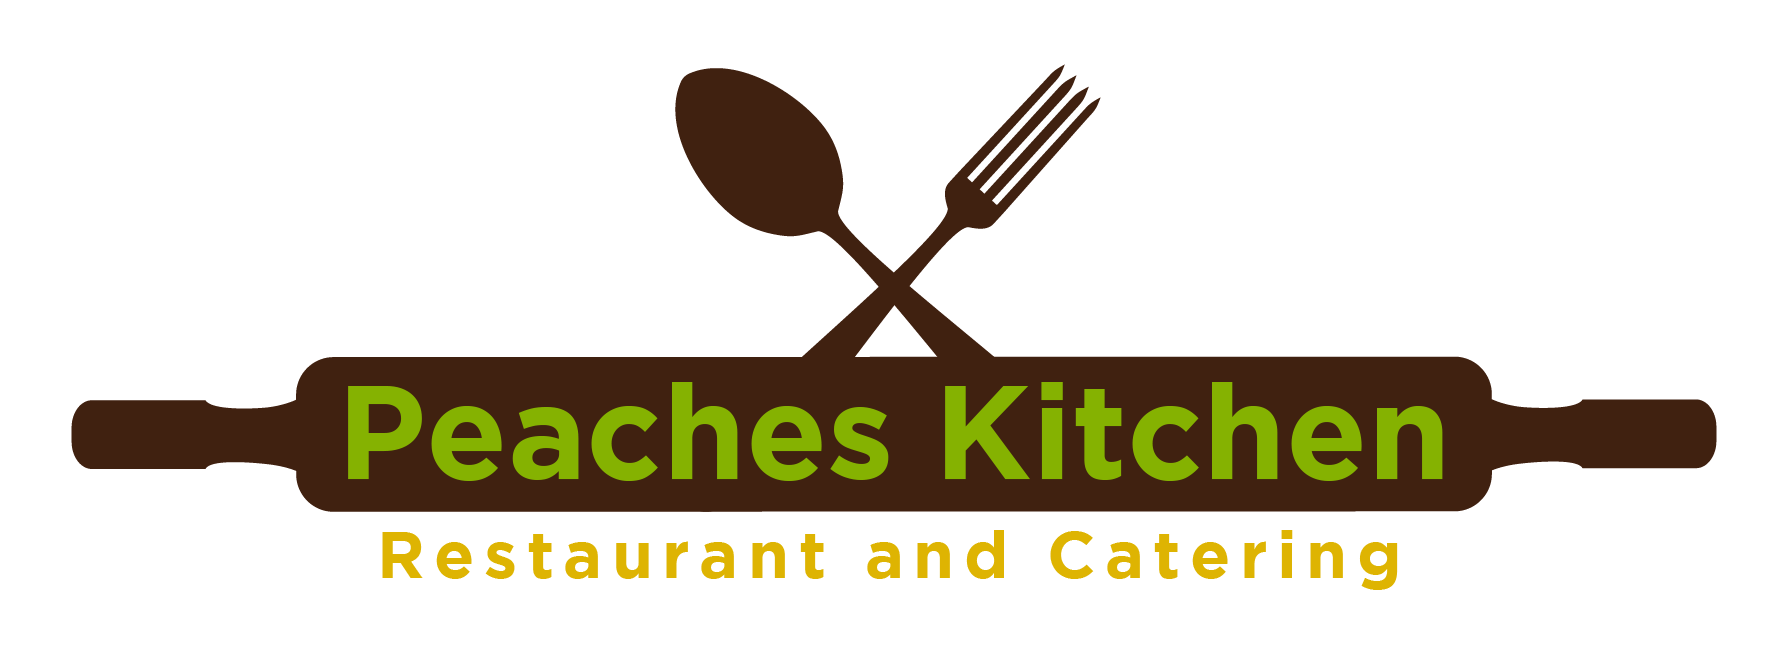 Peaches Kitchen Restaurant and Catering